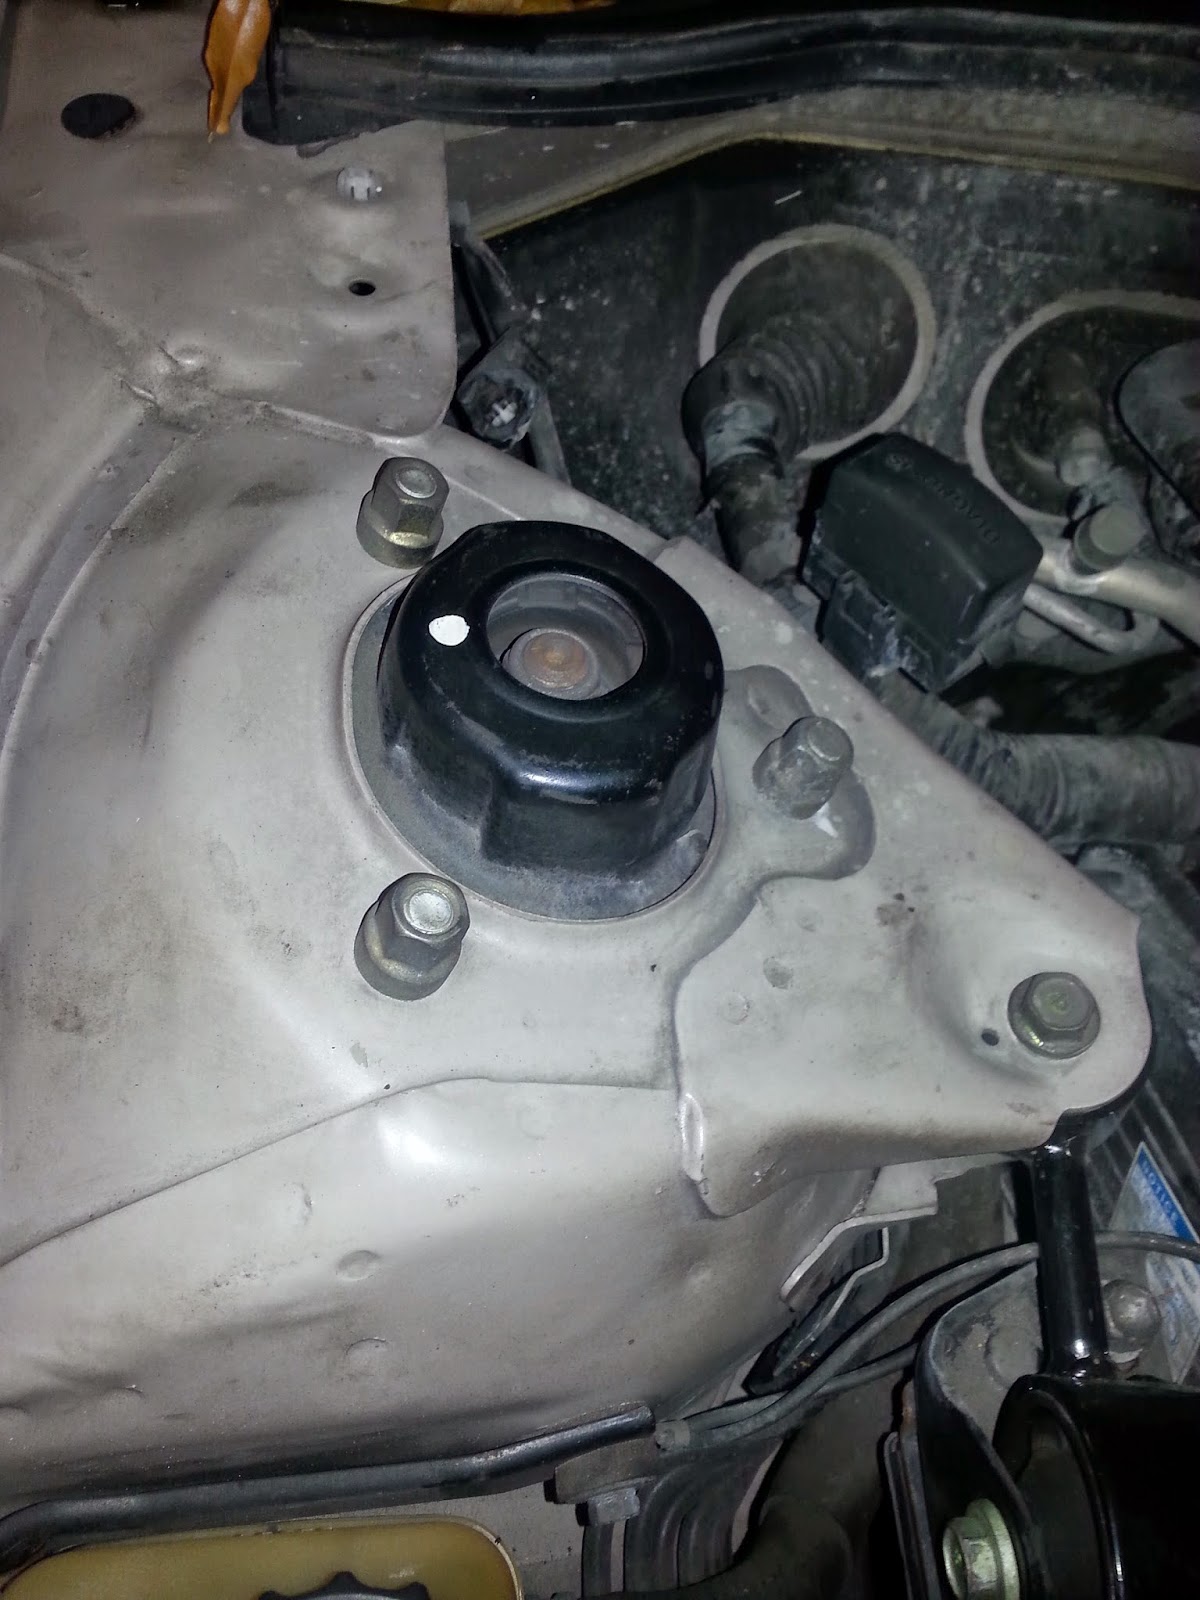 Corolla DIY: DIY - Toyota Camry Front Strut Replacement